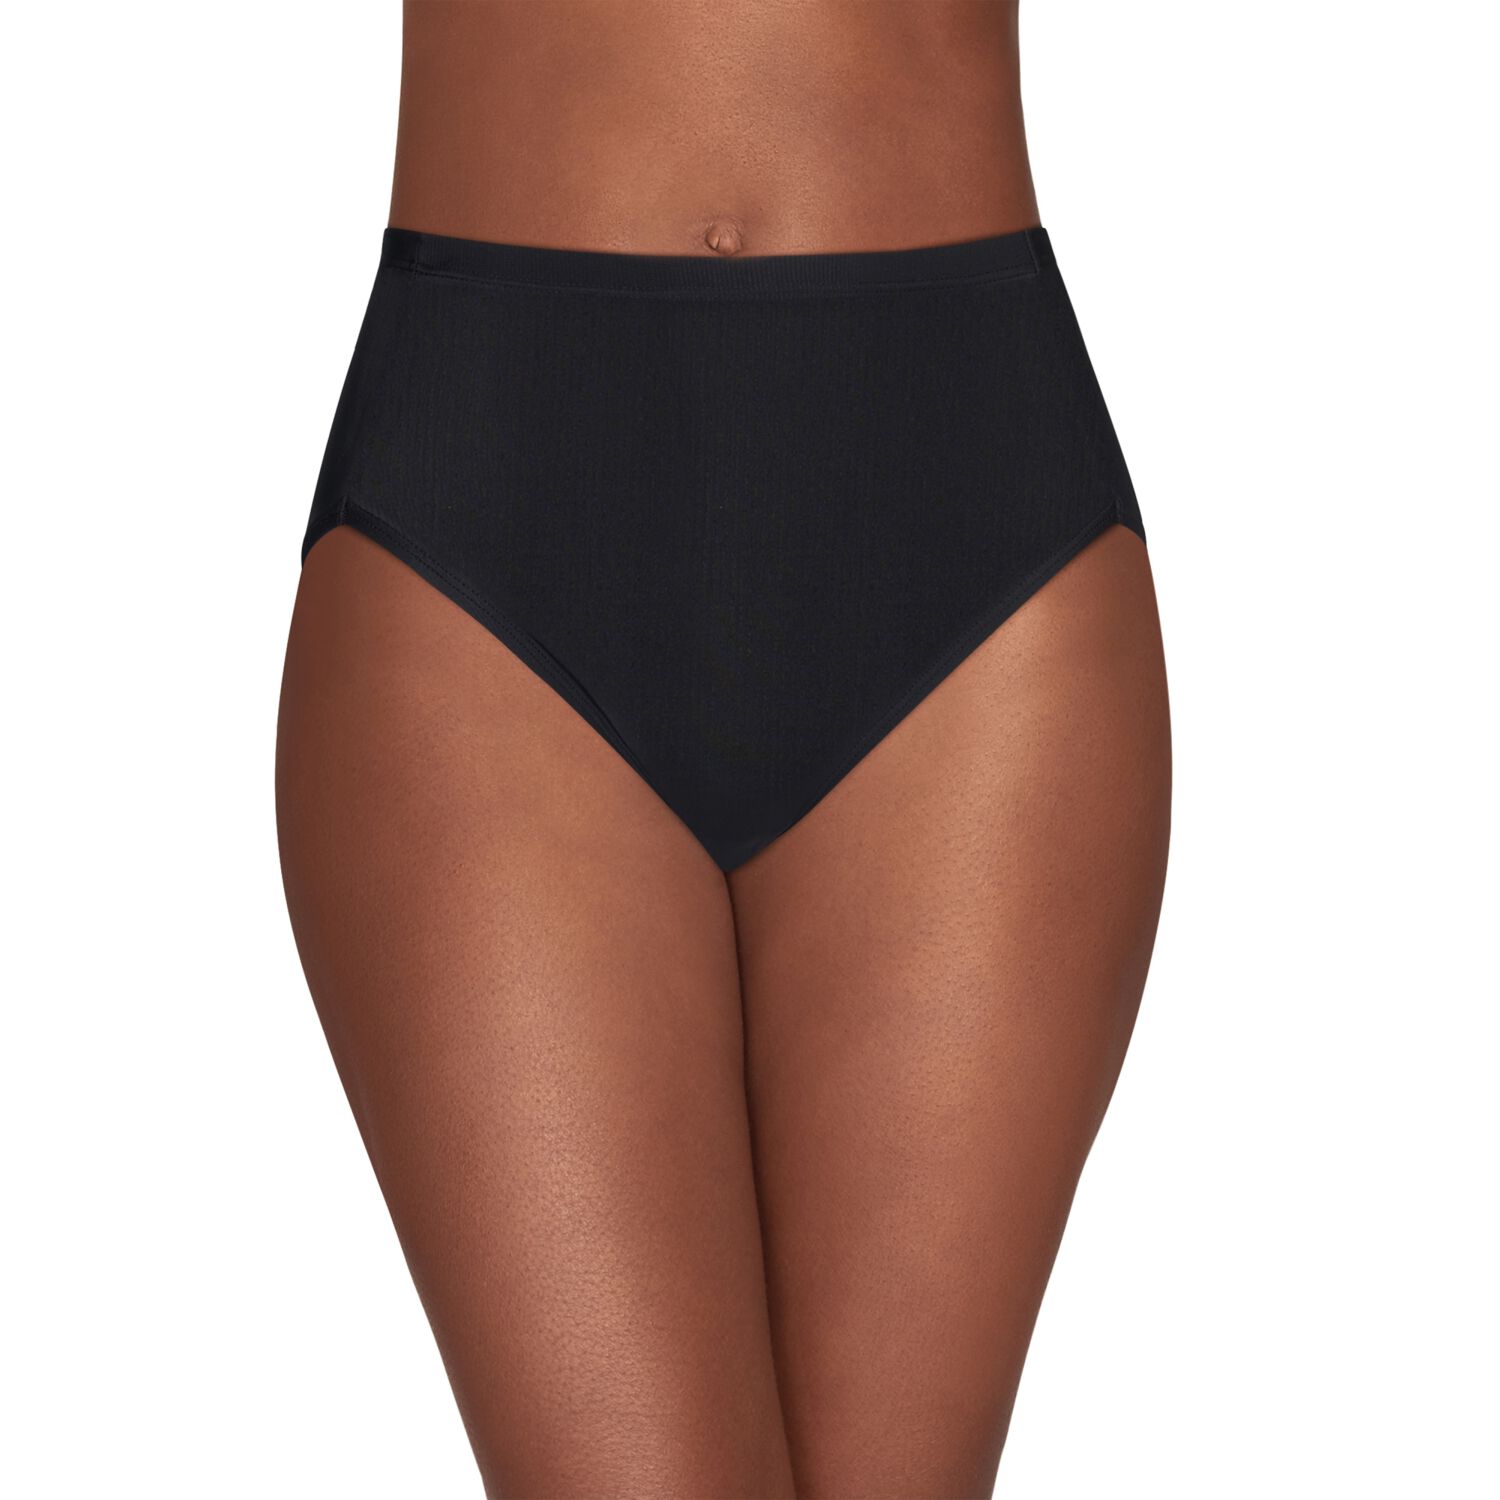 Cooling Touch Hi-Cut Panty Midnight Black